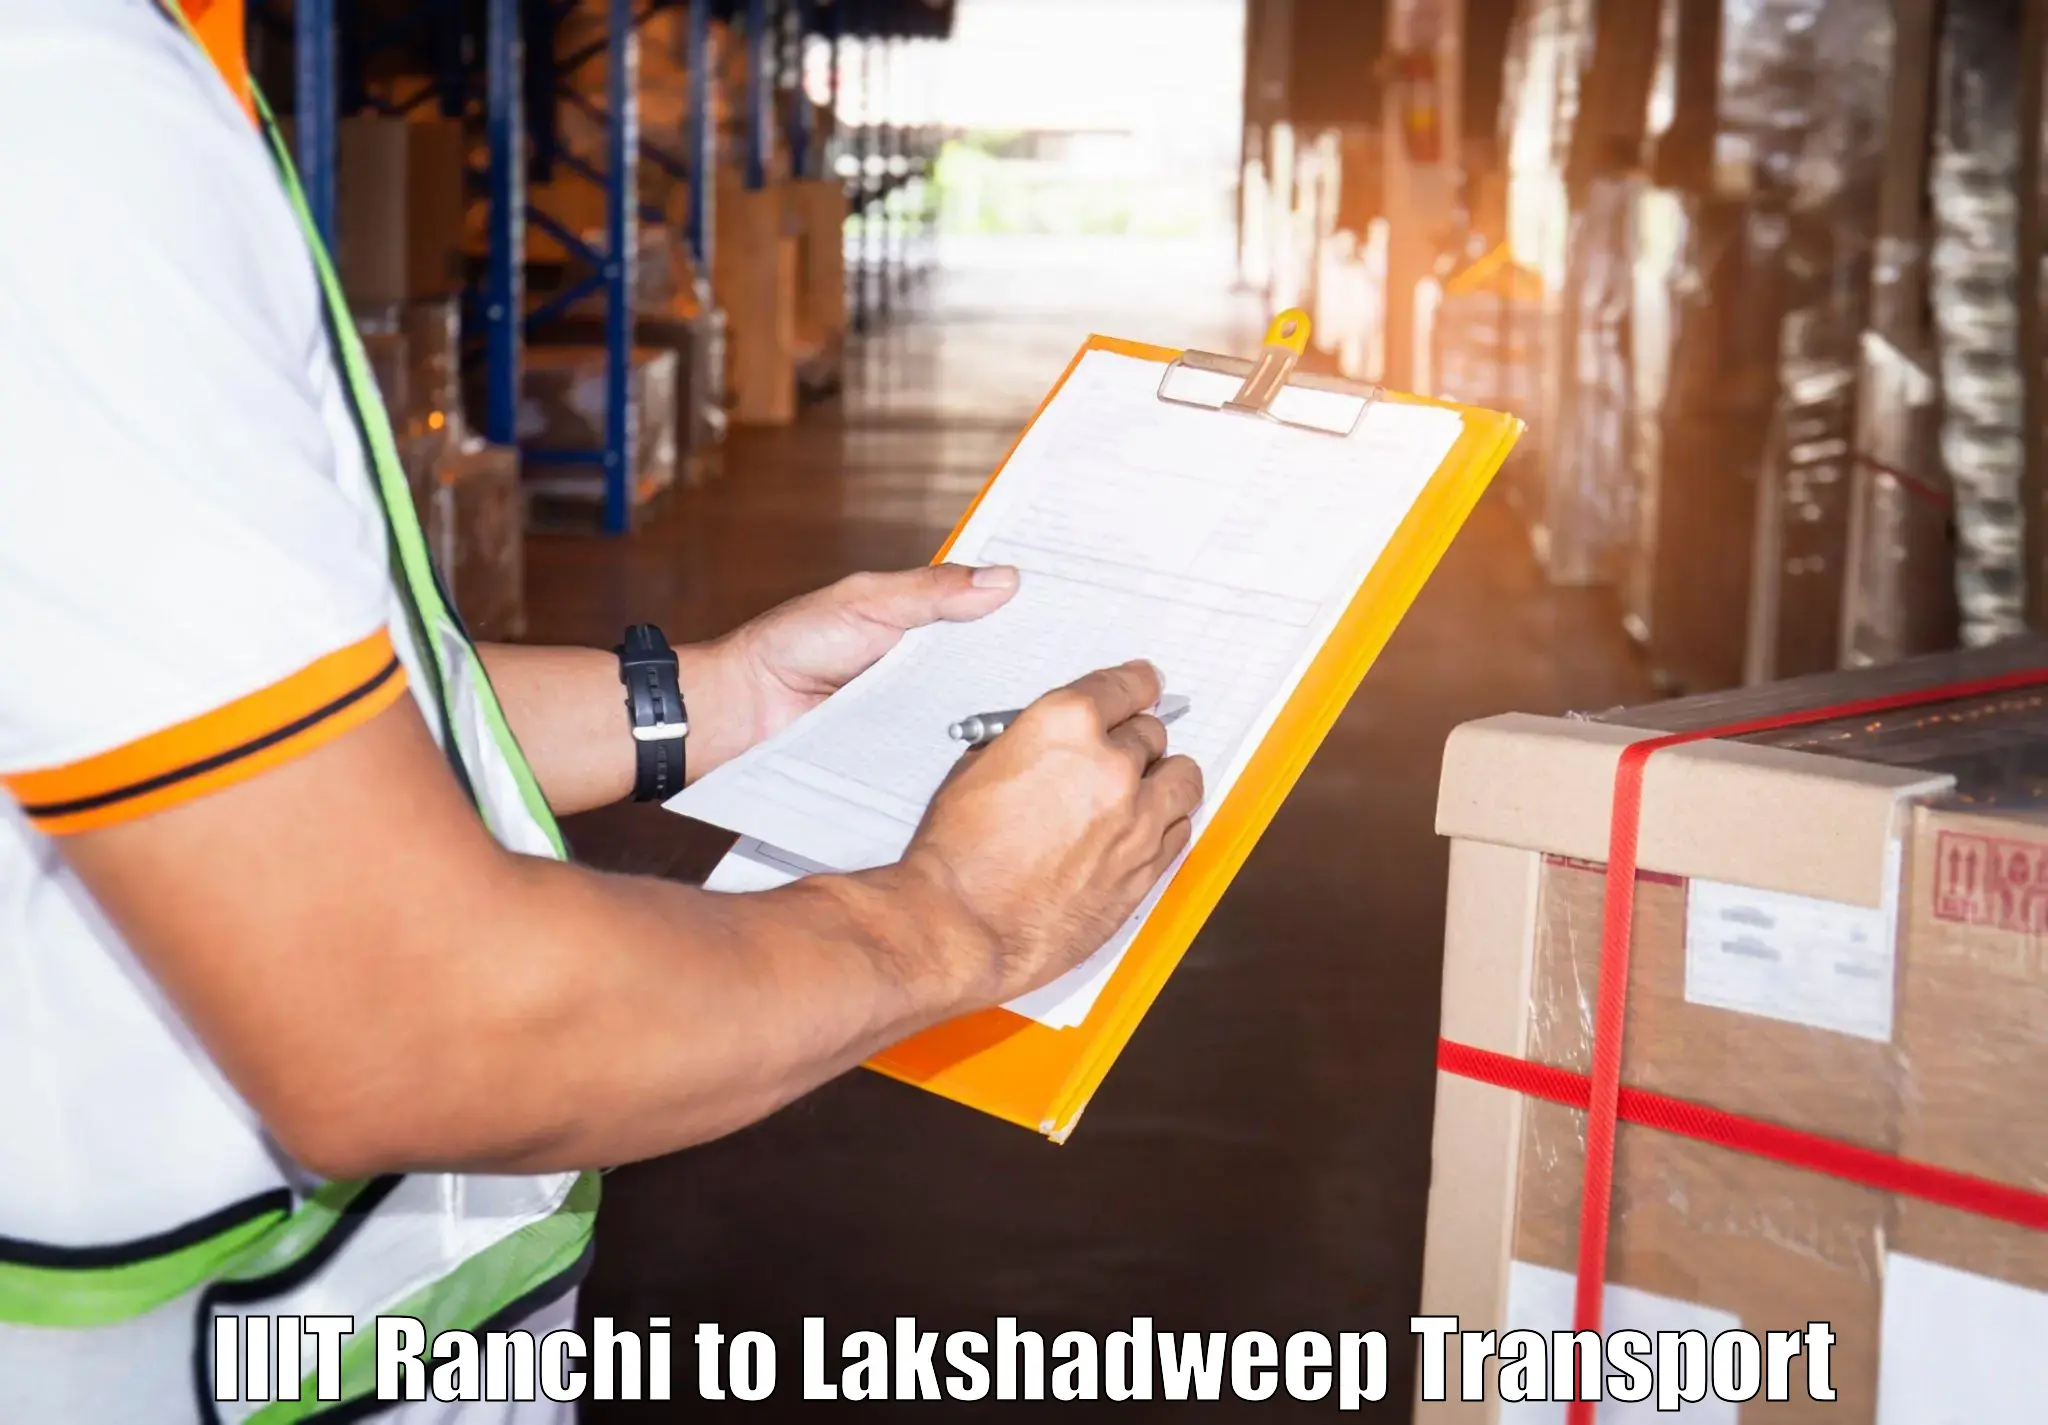 Luggage transport services in IIIT Ranchi to Lakshadweep